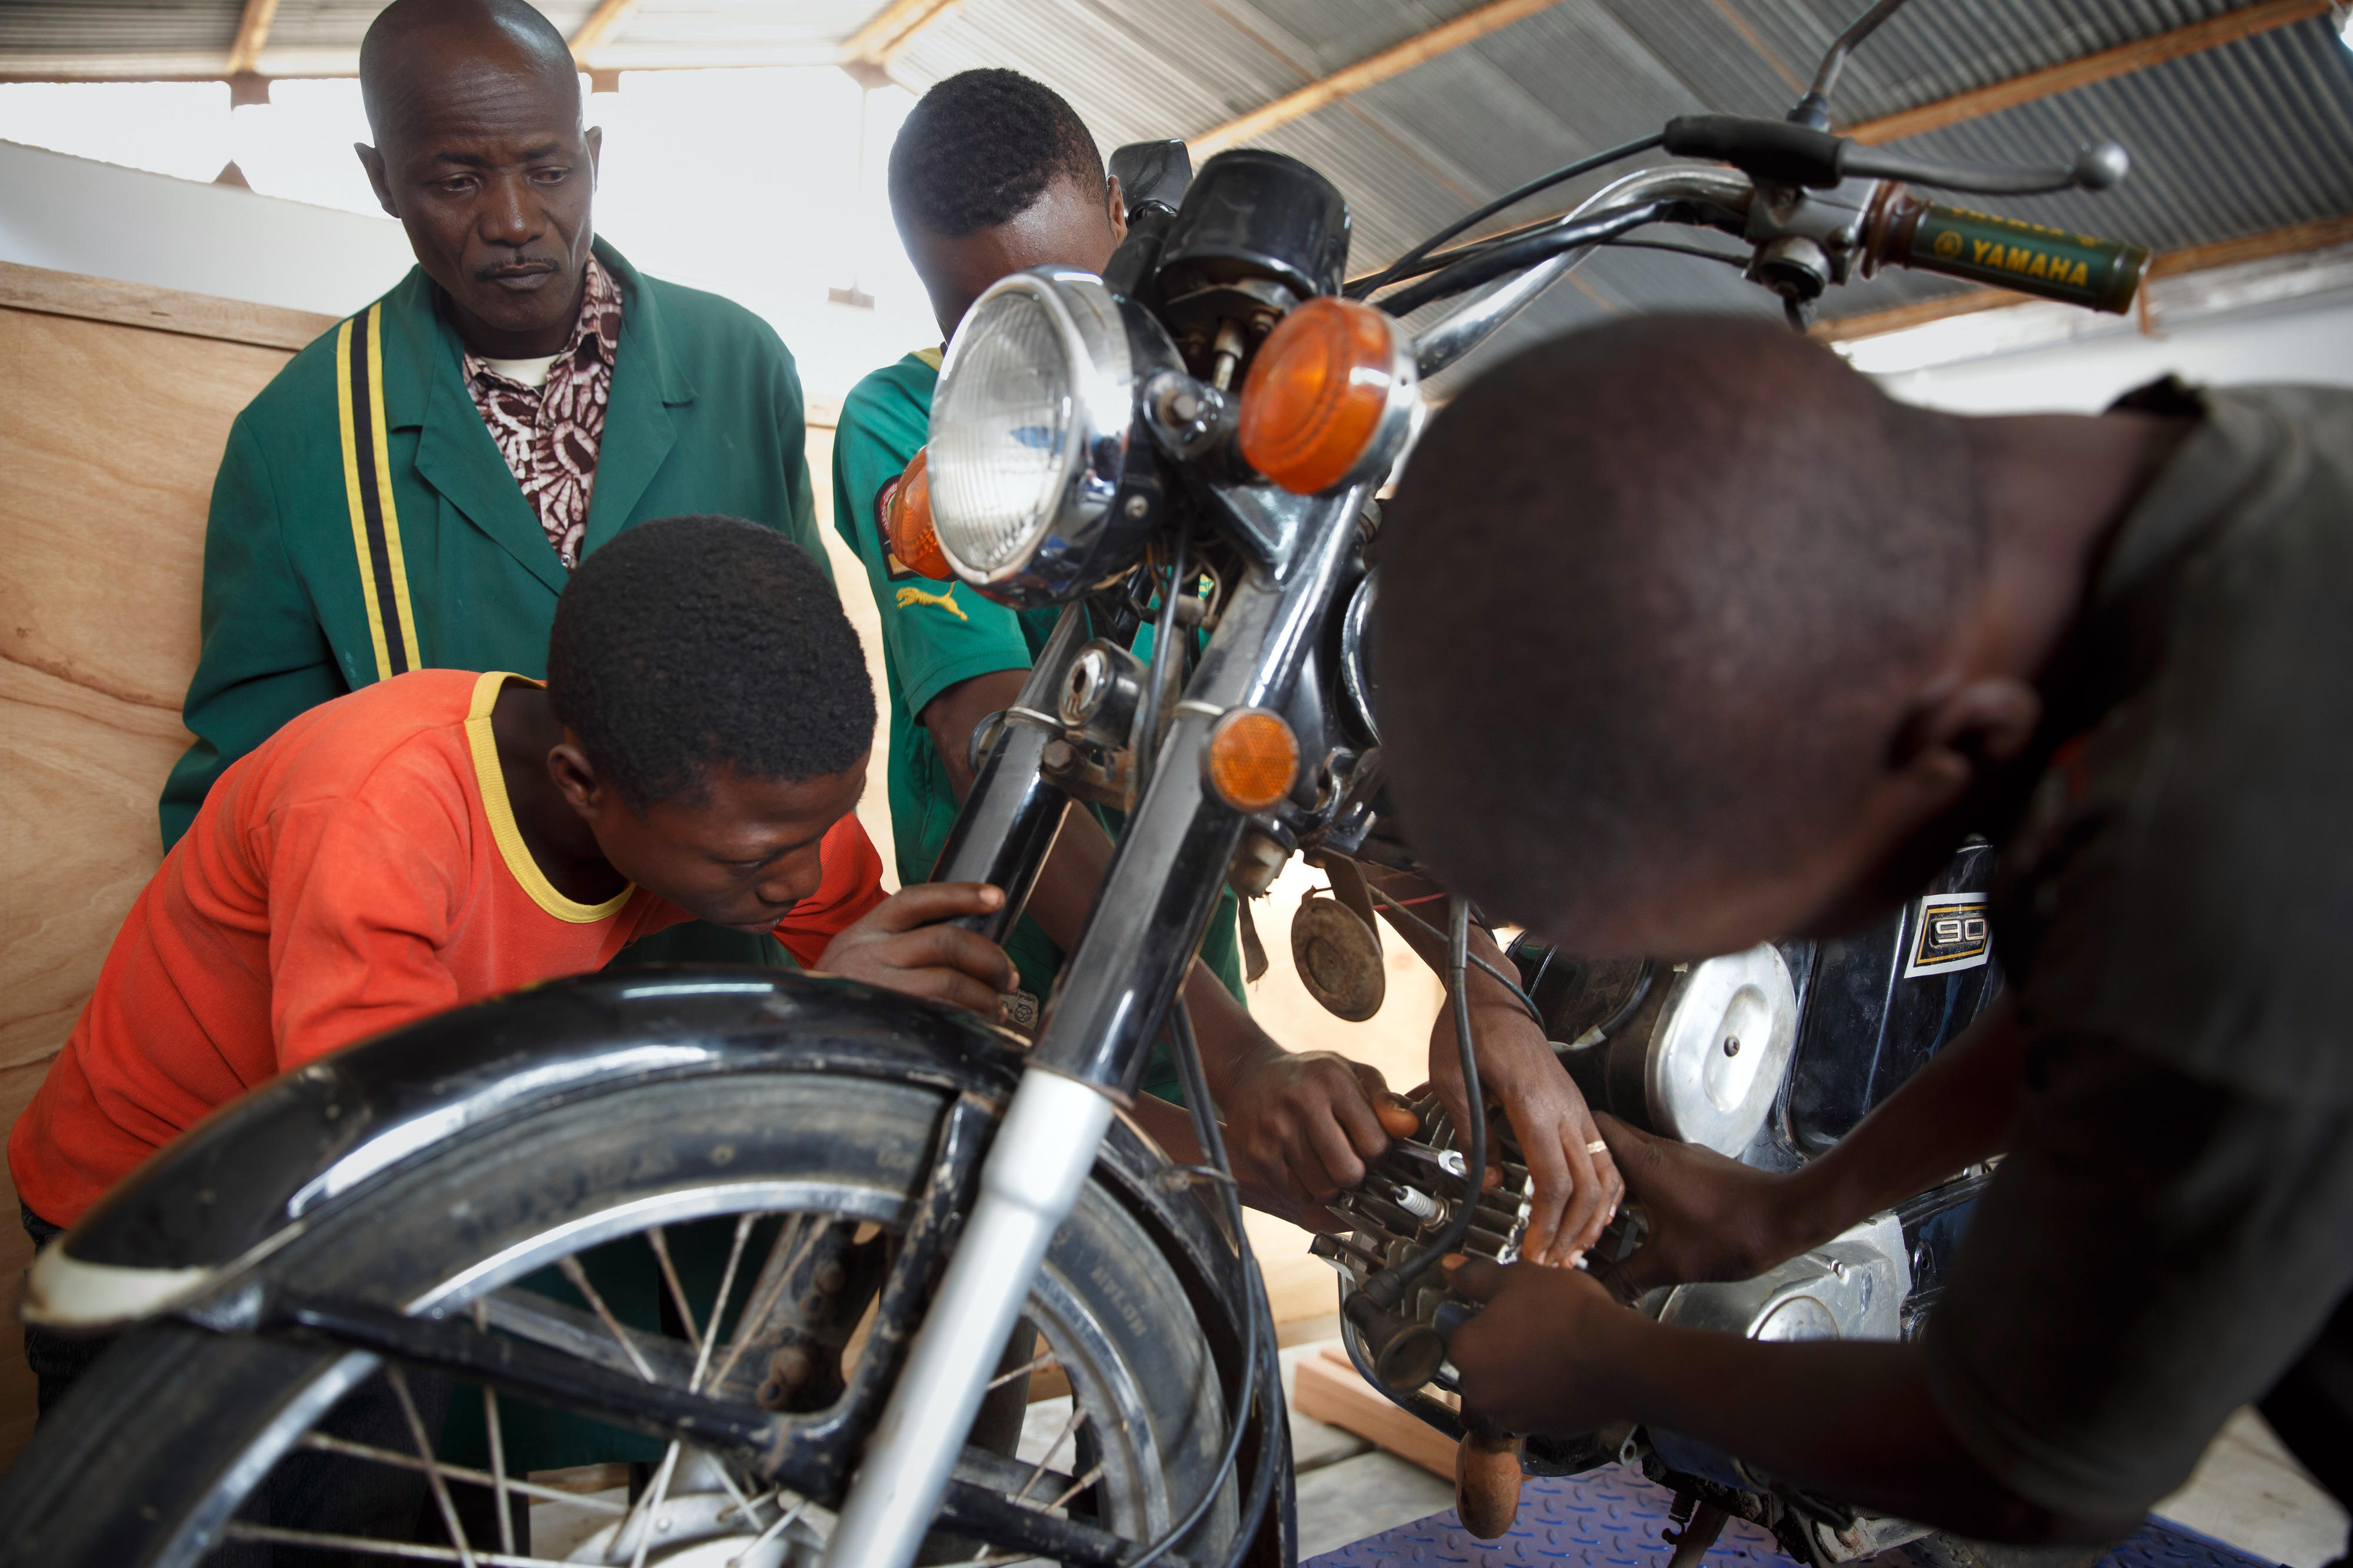 Vocational students enrolled in a motor vehicle mechanics course at a vocational school in Sokodé, Togo, are repairing a motorcycle.